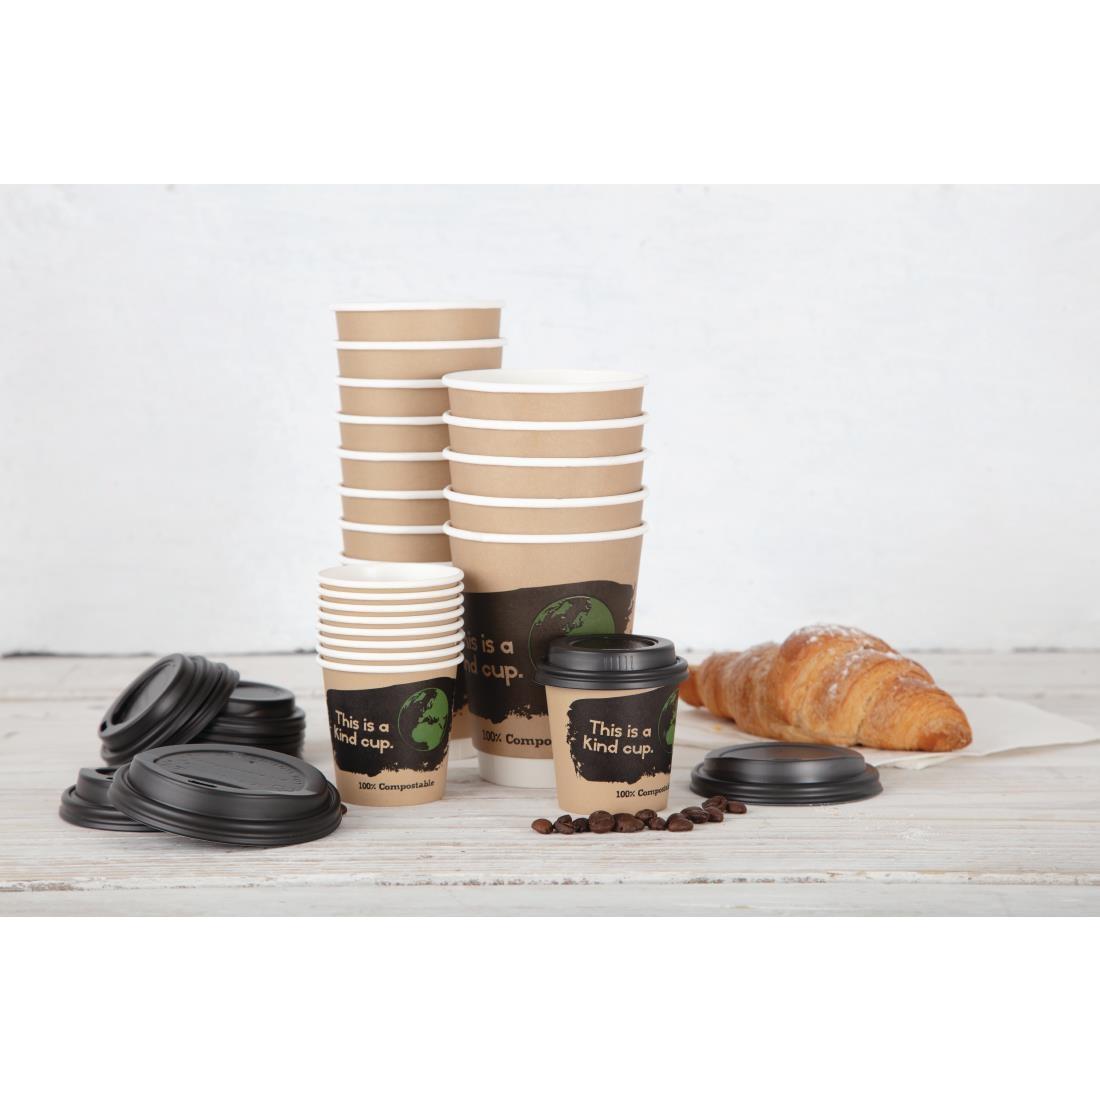 Fiesta Compostable Coffee Cups Double Wall 227ml / 8oz (Pack of 25) - DY984  - 6